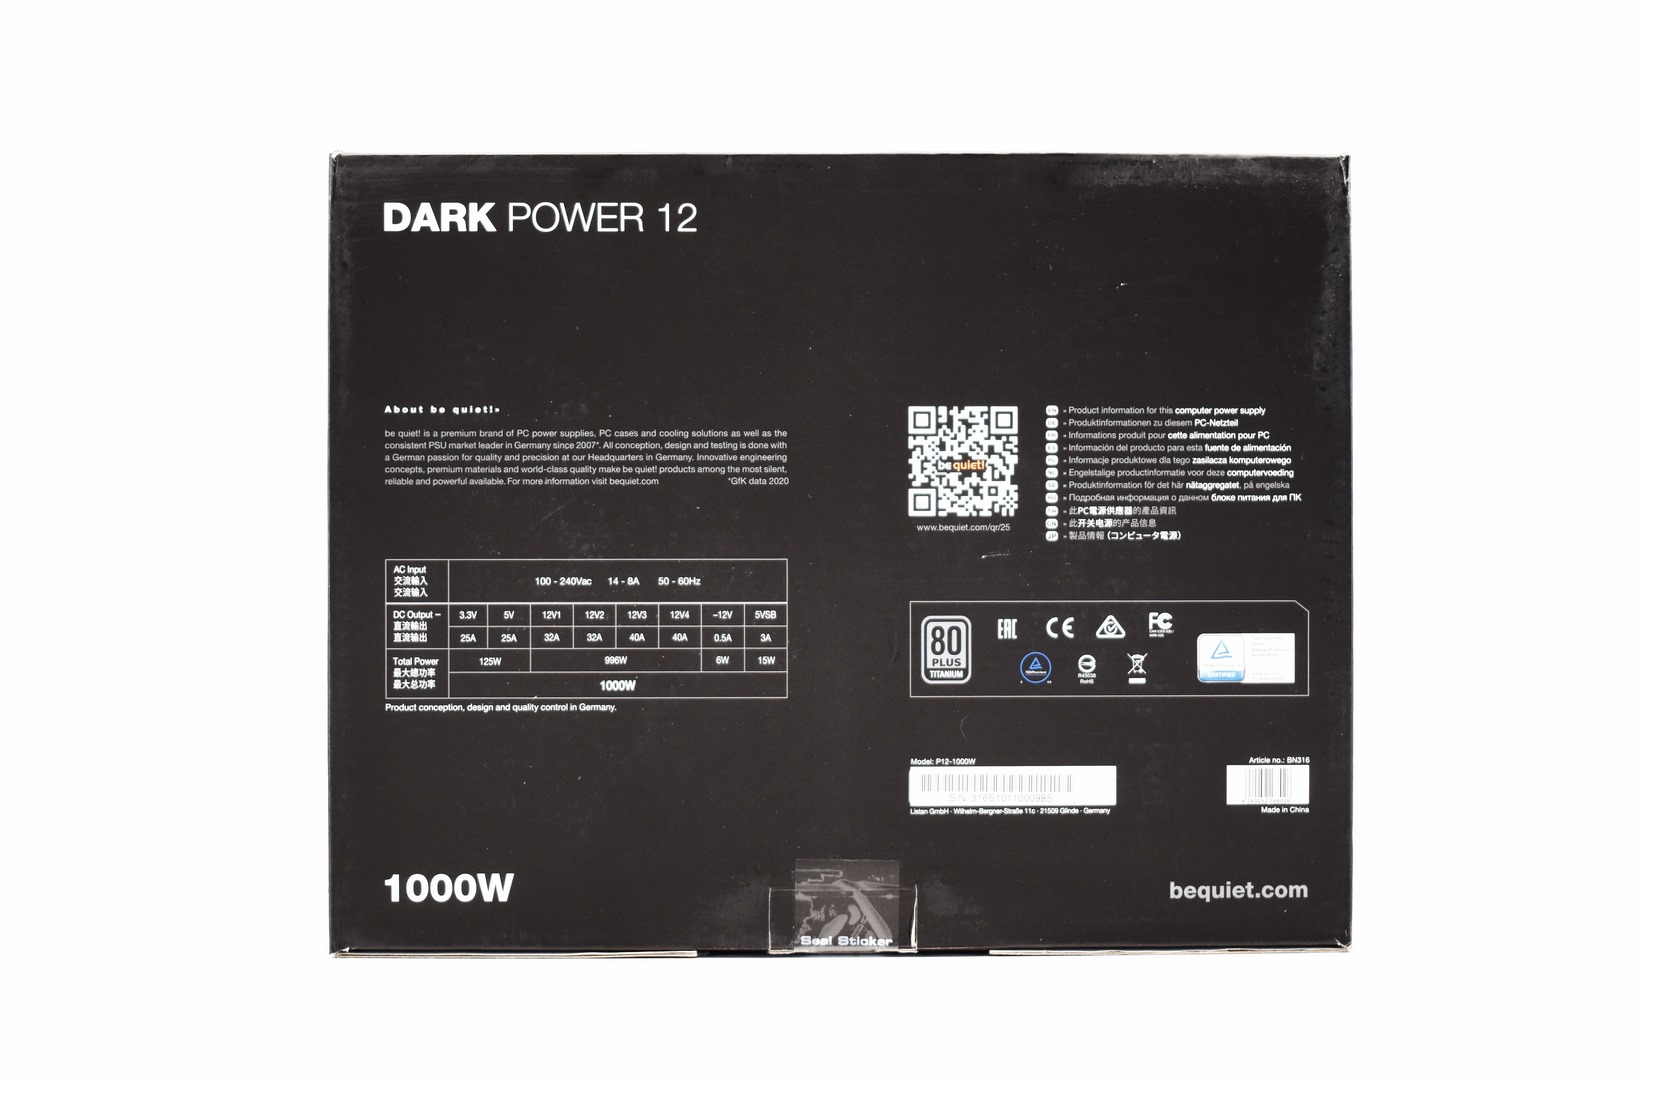 be quiet! Dark Power 12 1000W Power Supply Unit Review